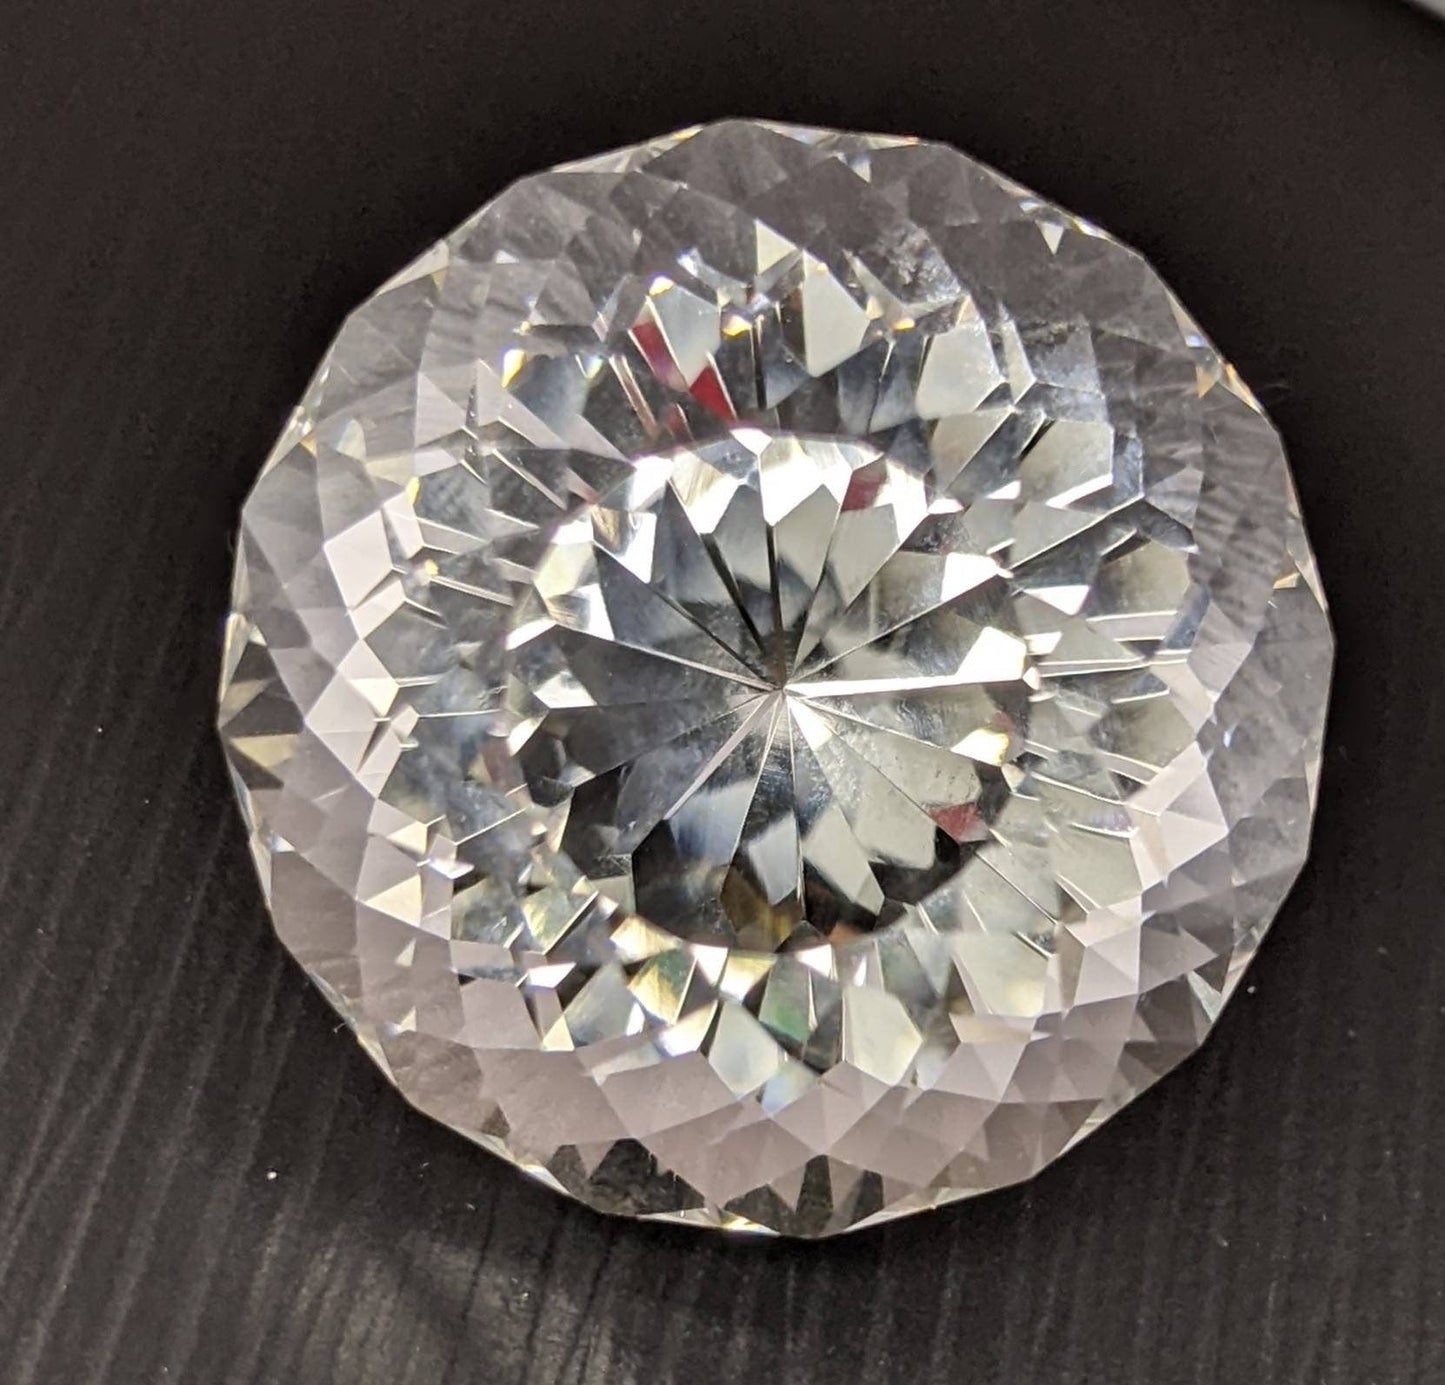 ARSAA GEMS AND MINERALSQuartz faceted gem, eye clean clarity and round cut shape, 79 carats - Premium  from ARSAA GEMS AND MINERALS - Just $80.00! Shop now at ARSAA GEMS AND MINERALS